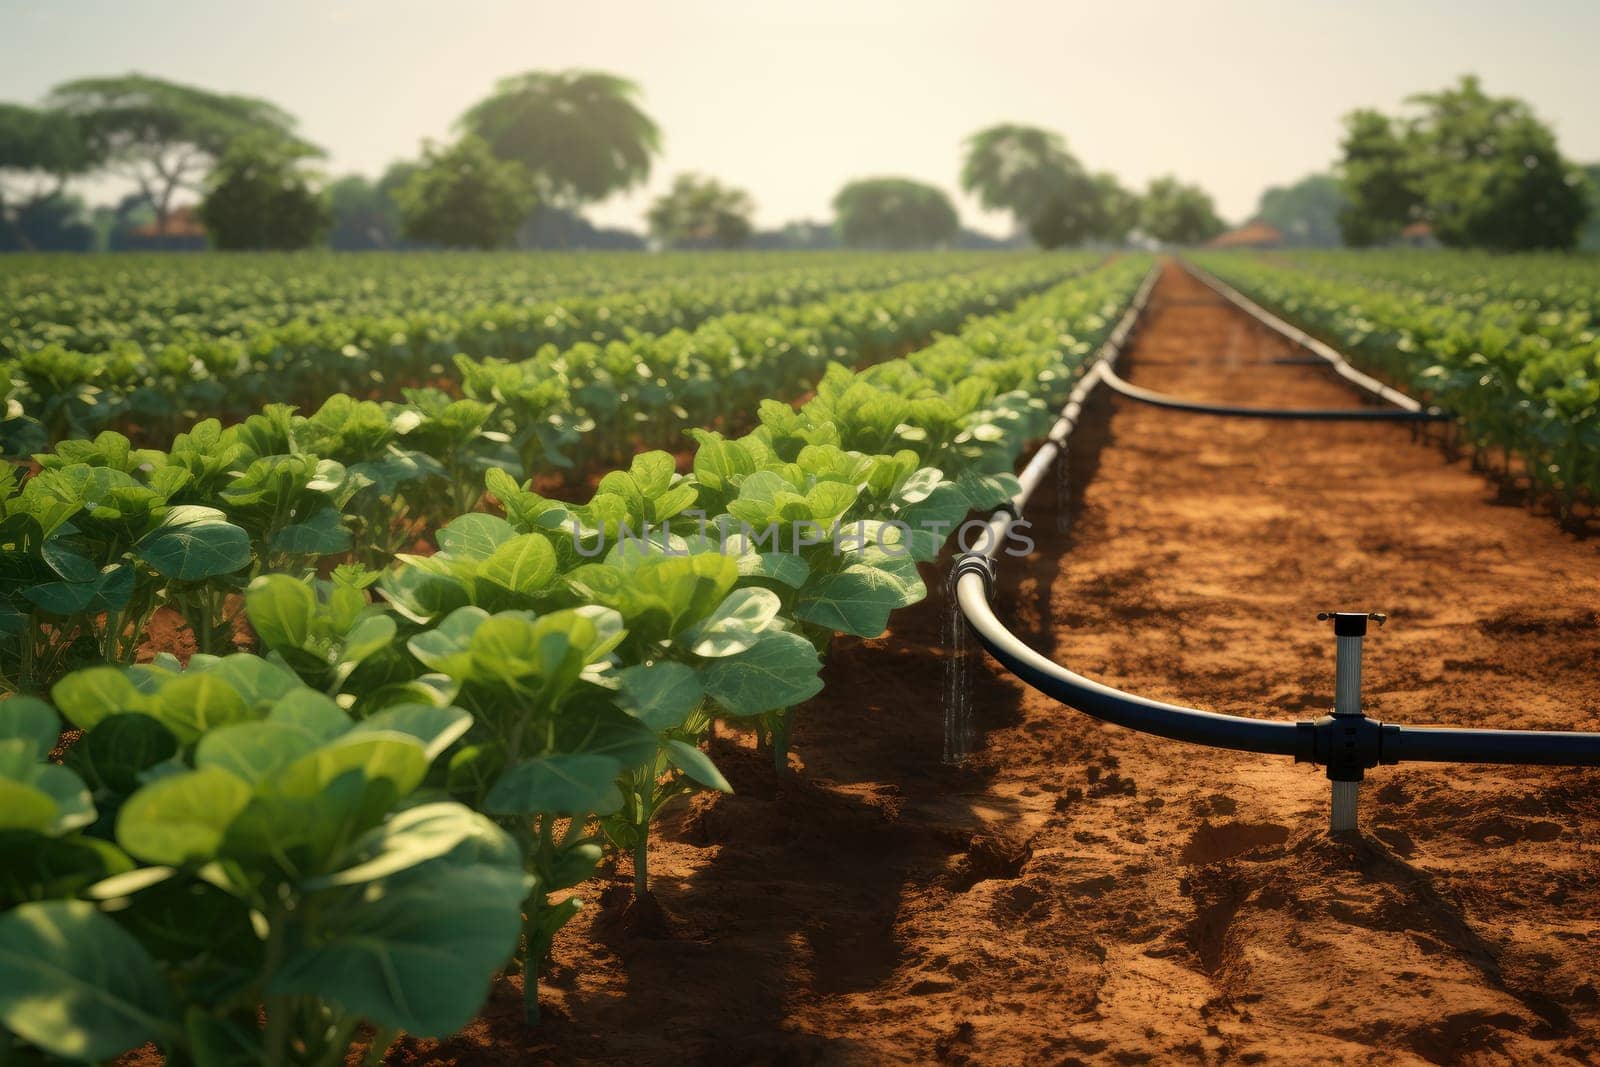 Modern Drip Irrigation Technology Ensuring Water Conservation in Agricultural Practices by Yurich32